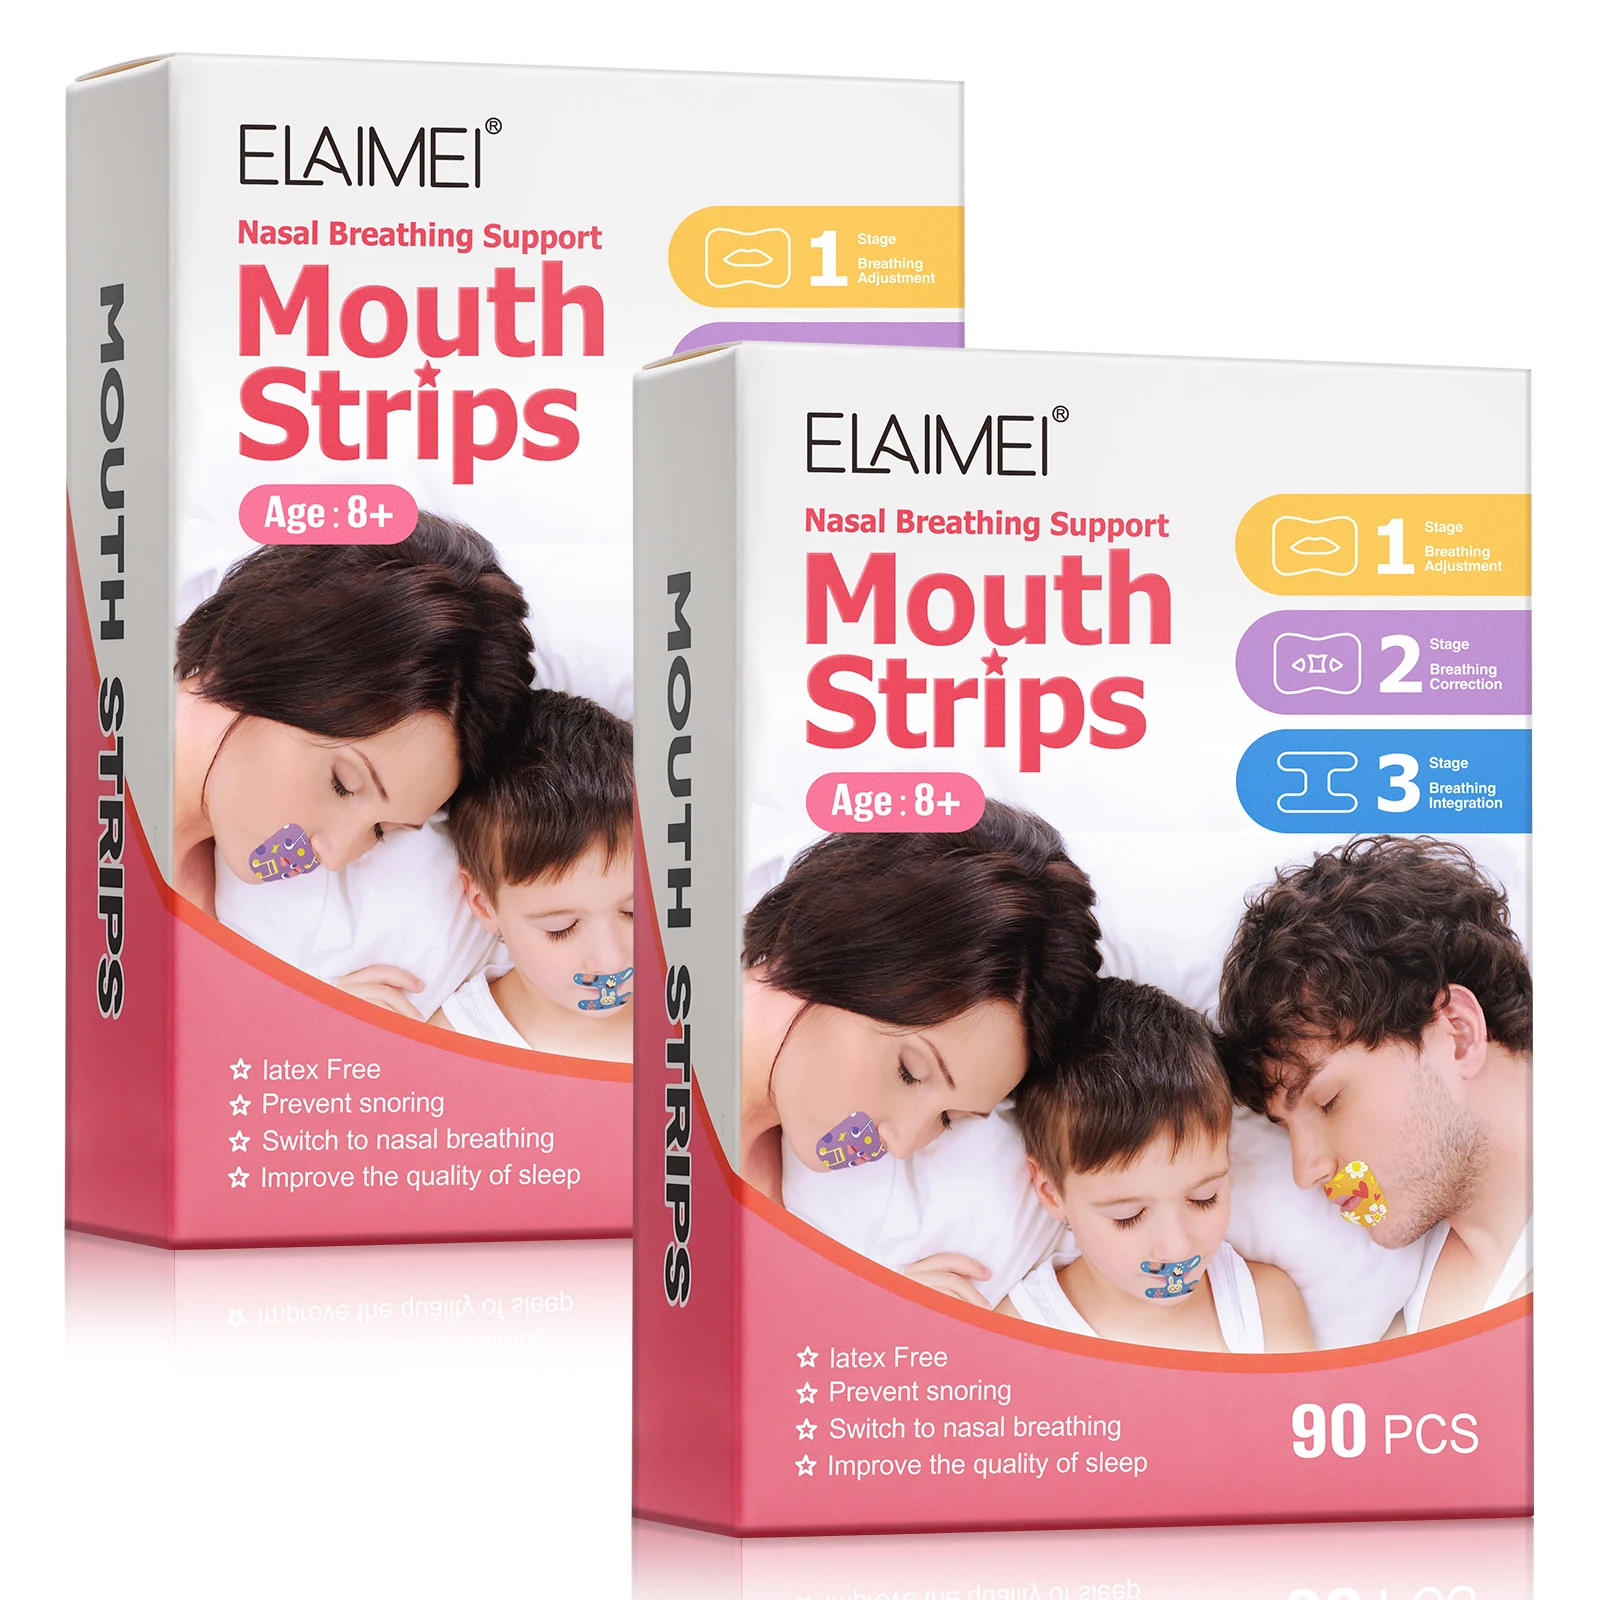 

ELAIMEI 90 Pcs Nasal Breathing Support Sleep Strips Improved Nighttime Sleeping Relieves Snoring Mouth Tape